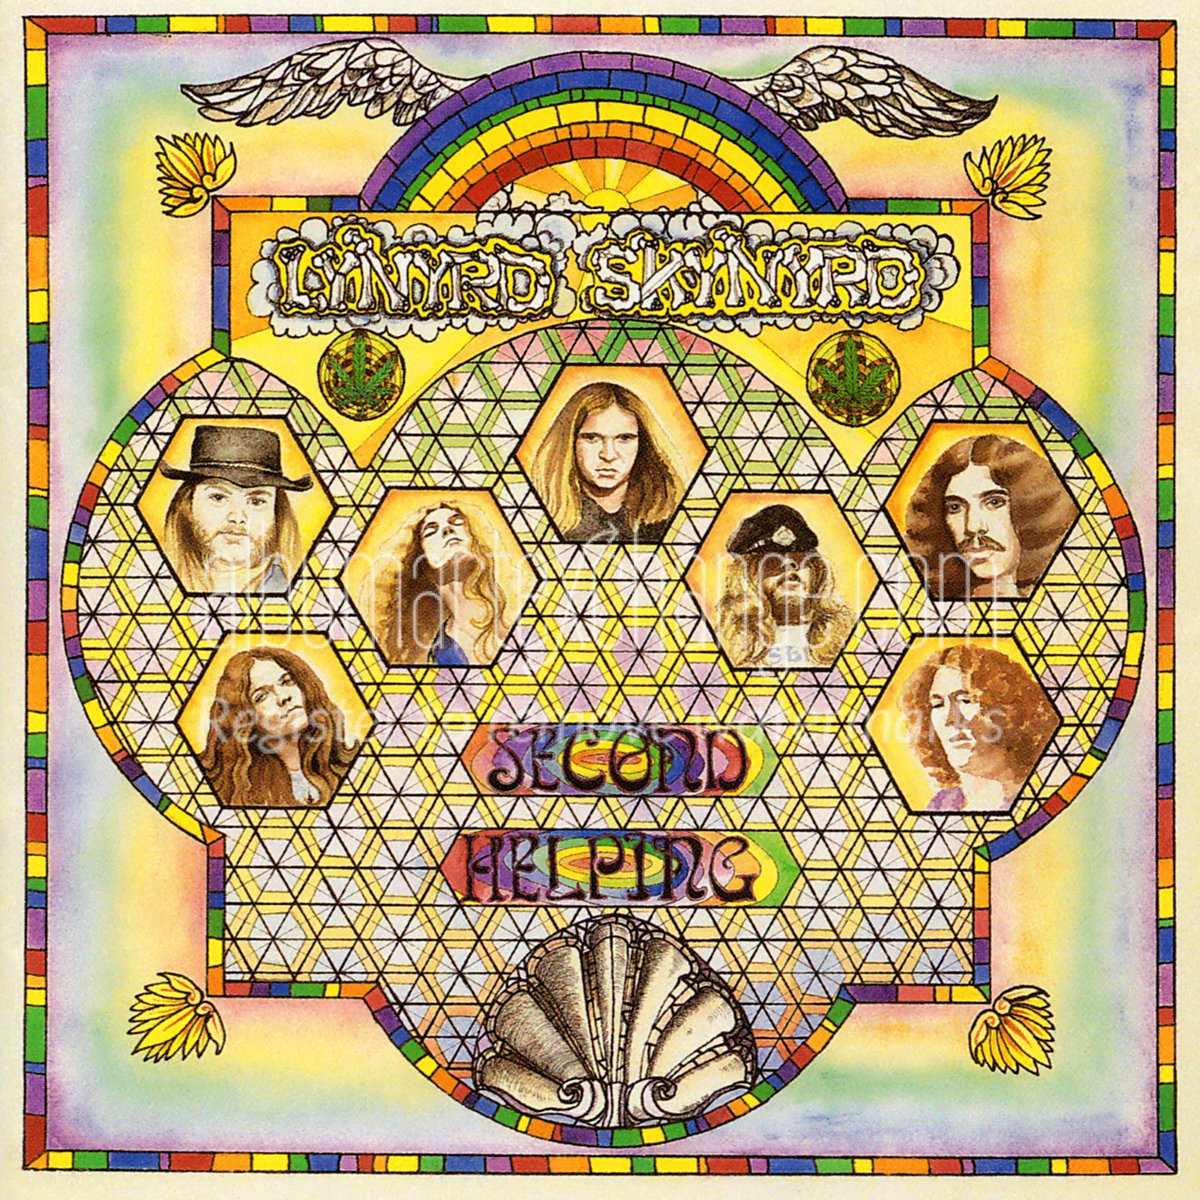 50 years ago today, Skynyrd gave us a Second Helping. It was delicious.